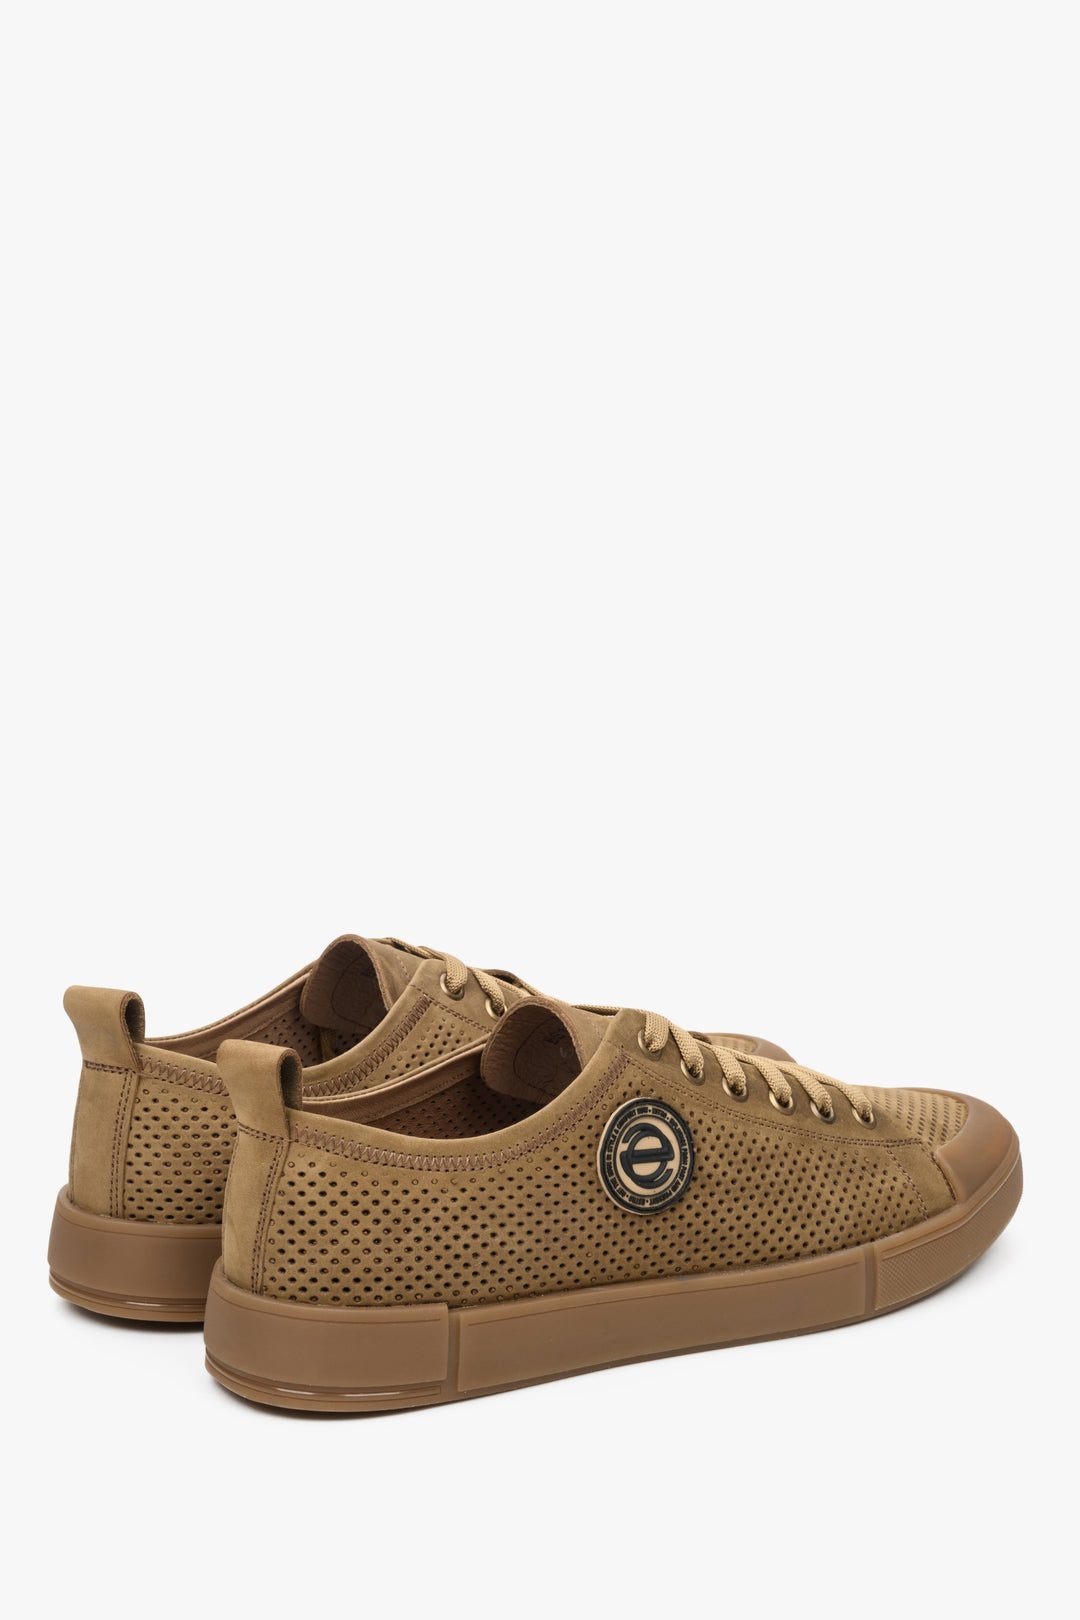 Men's sneakers made of genuine leather with perforations by Estro - presentation of the heel and side seam of the shoe.